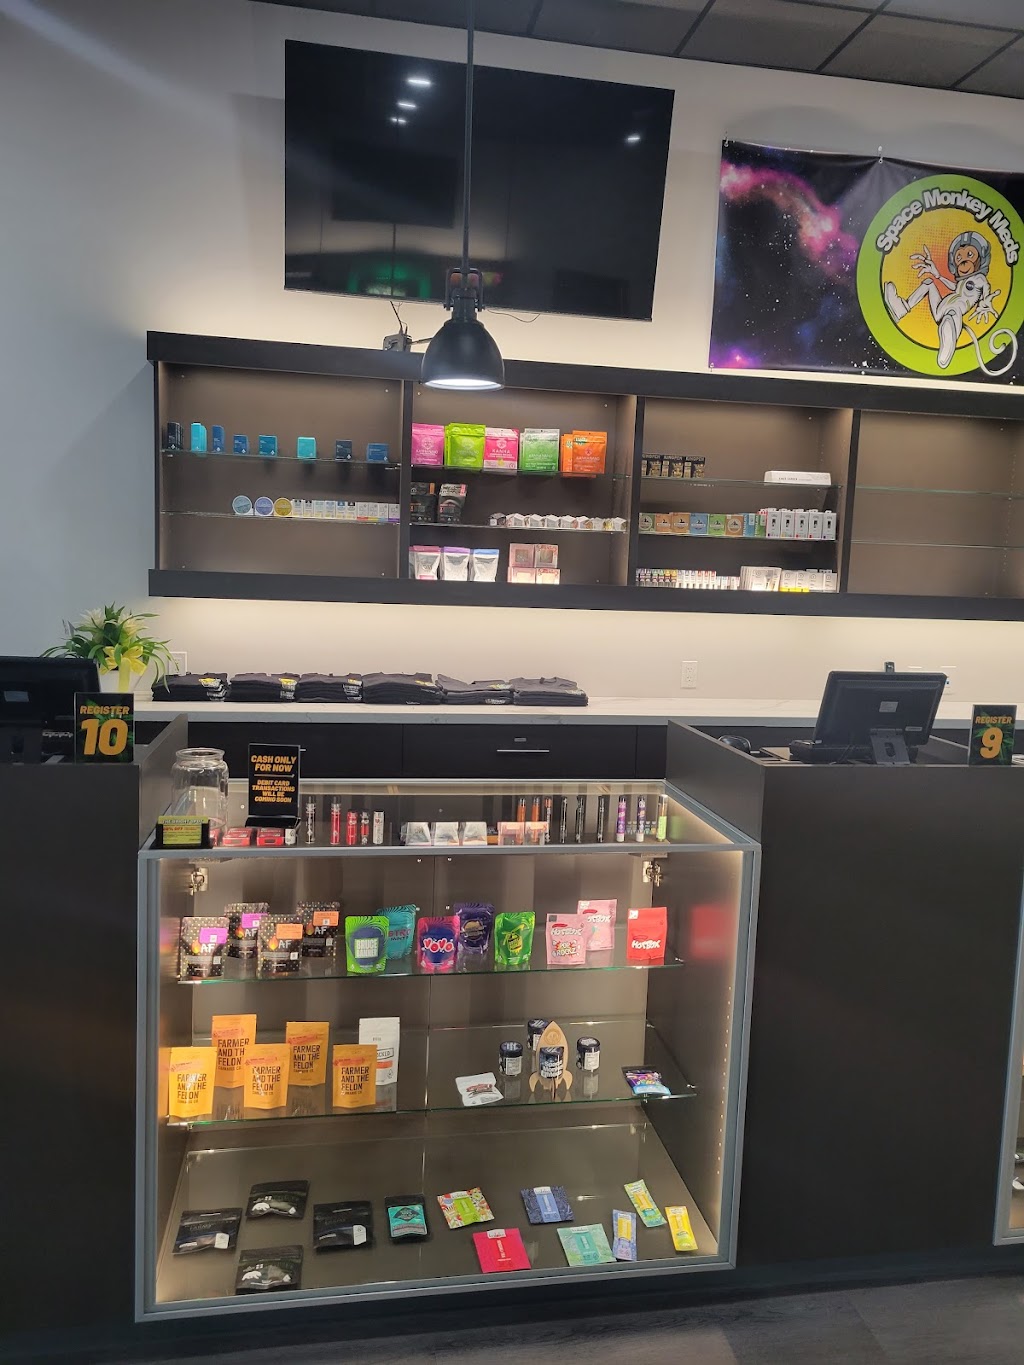 The Bright Spot Dispensary & Delivery | 1990 Walters Ct, Fairfield, CA 94533 | Phone: (707) 419-4538